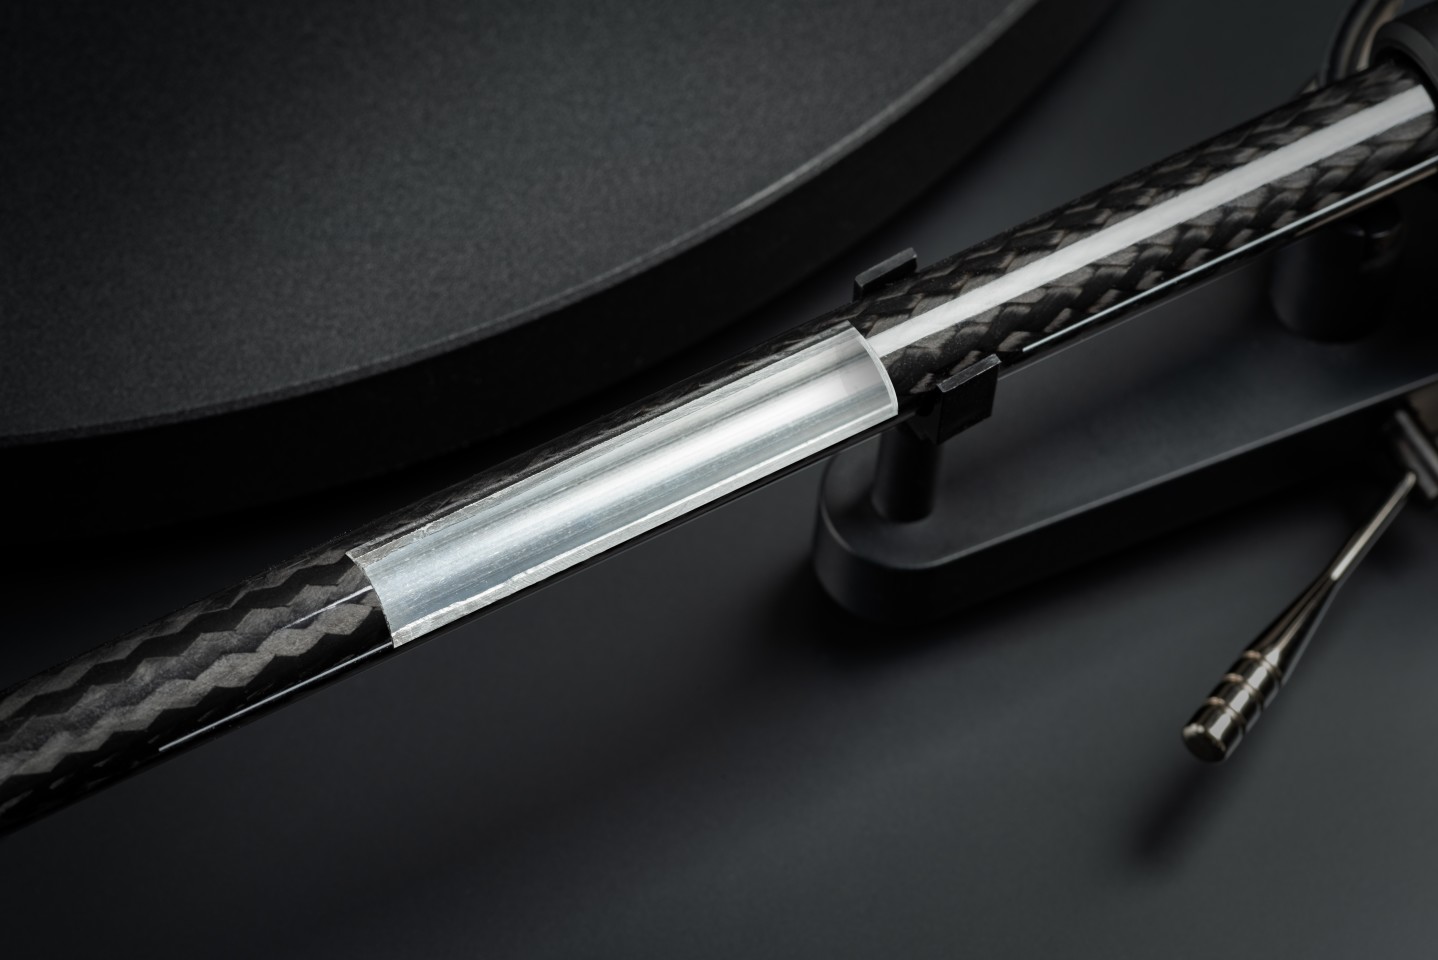 The Debut Pro comes equipped with Pro-Ject's aluminum/carbon tonearm